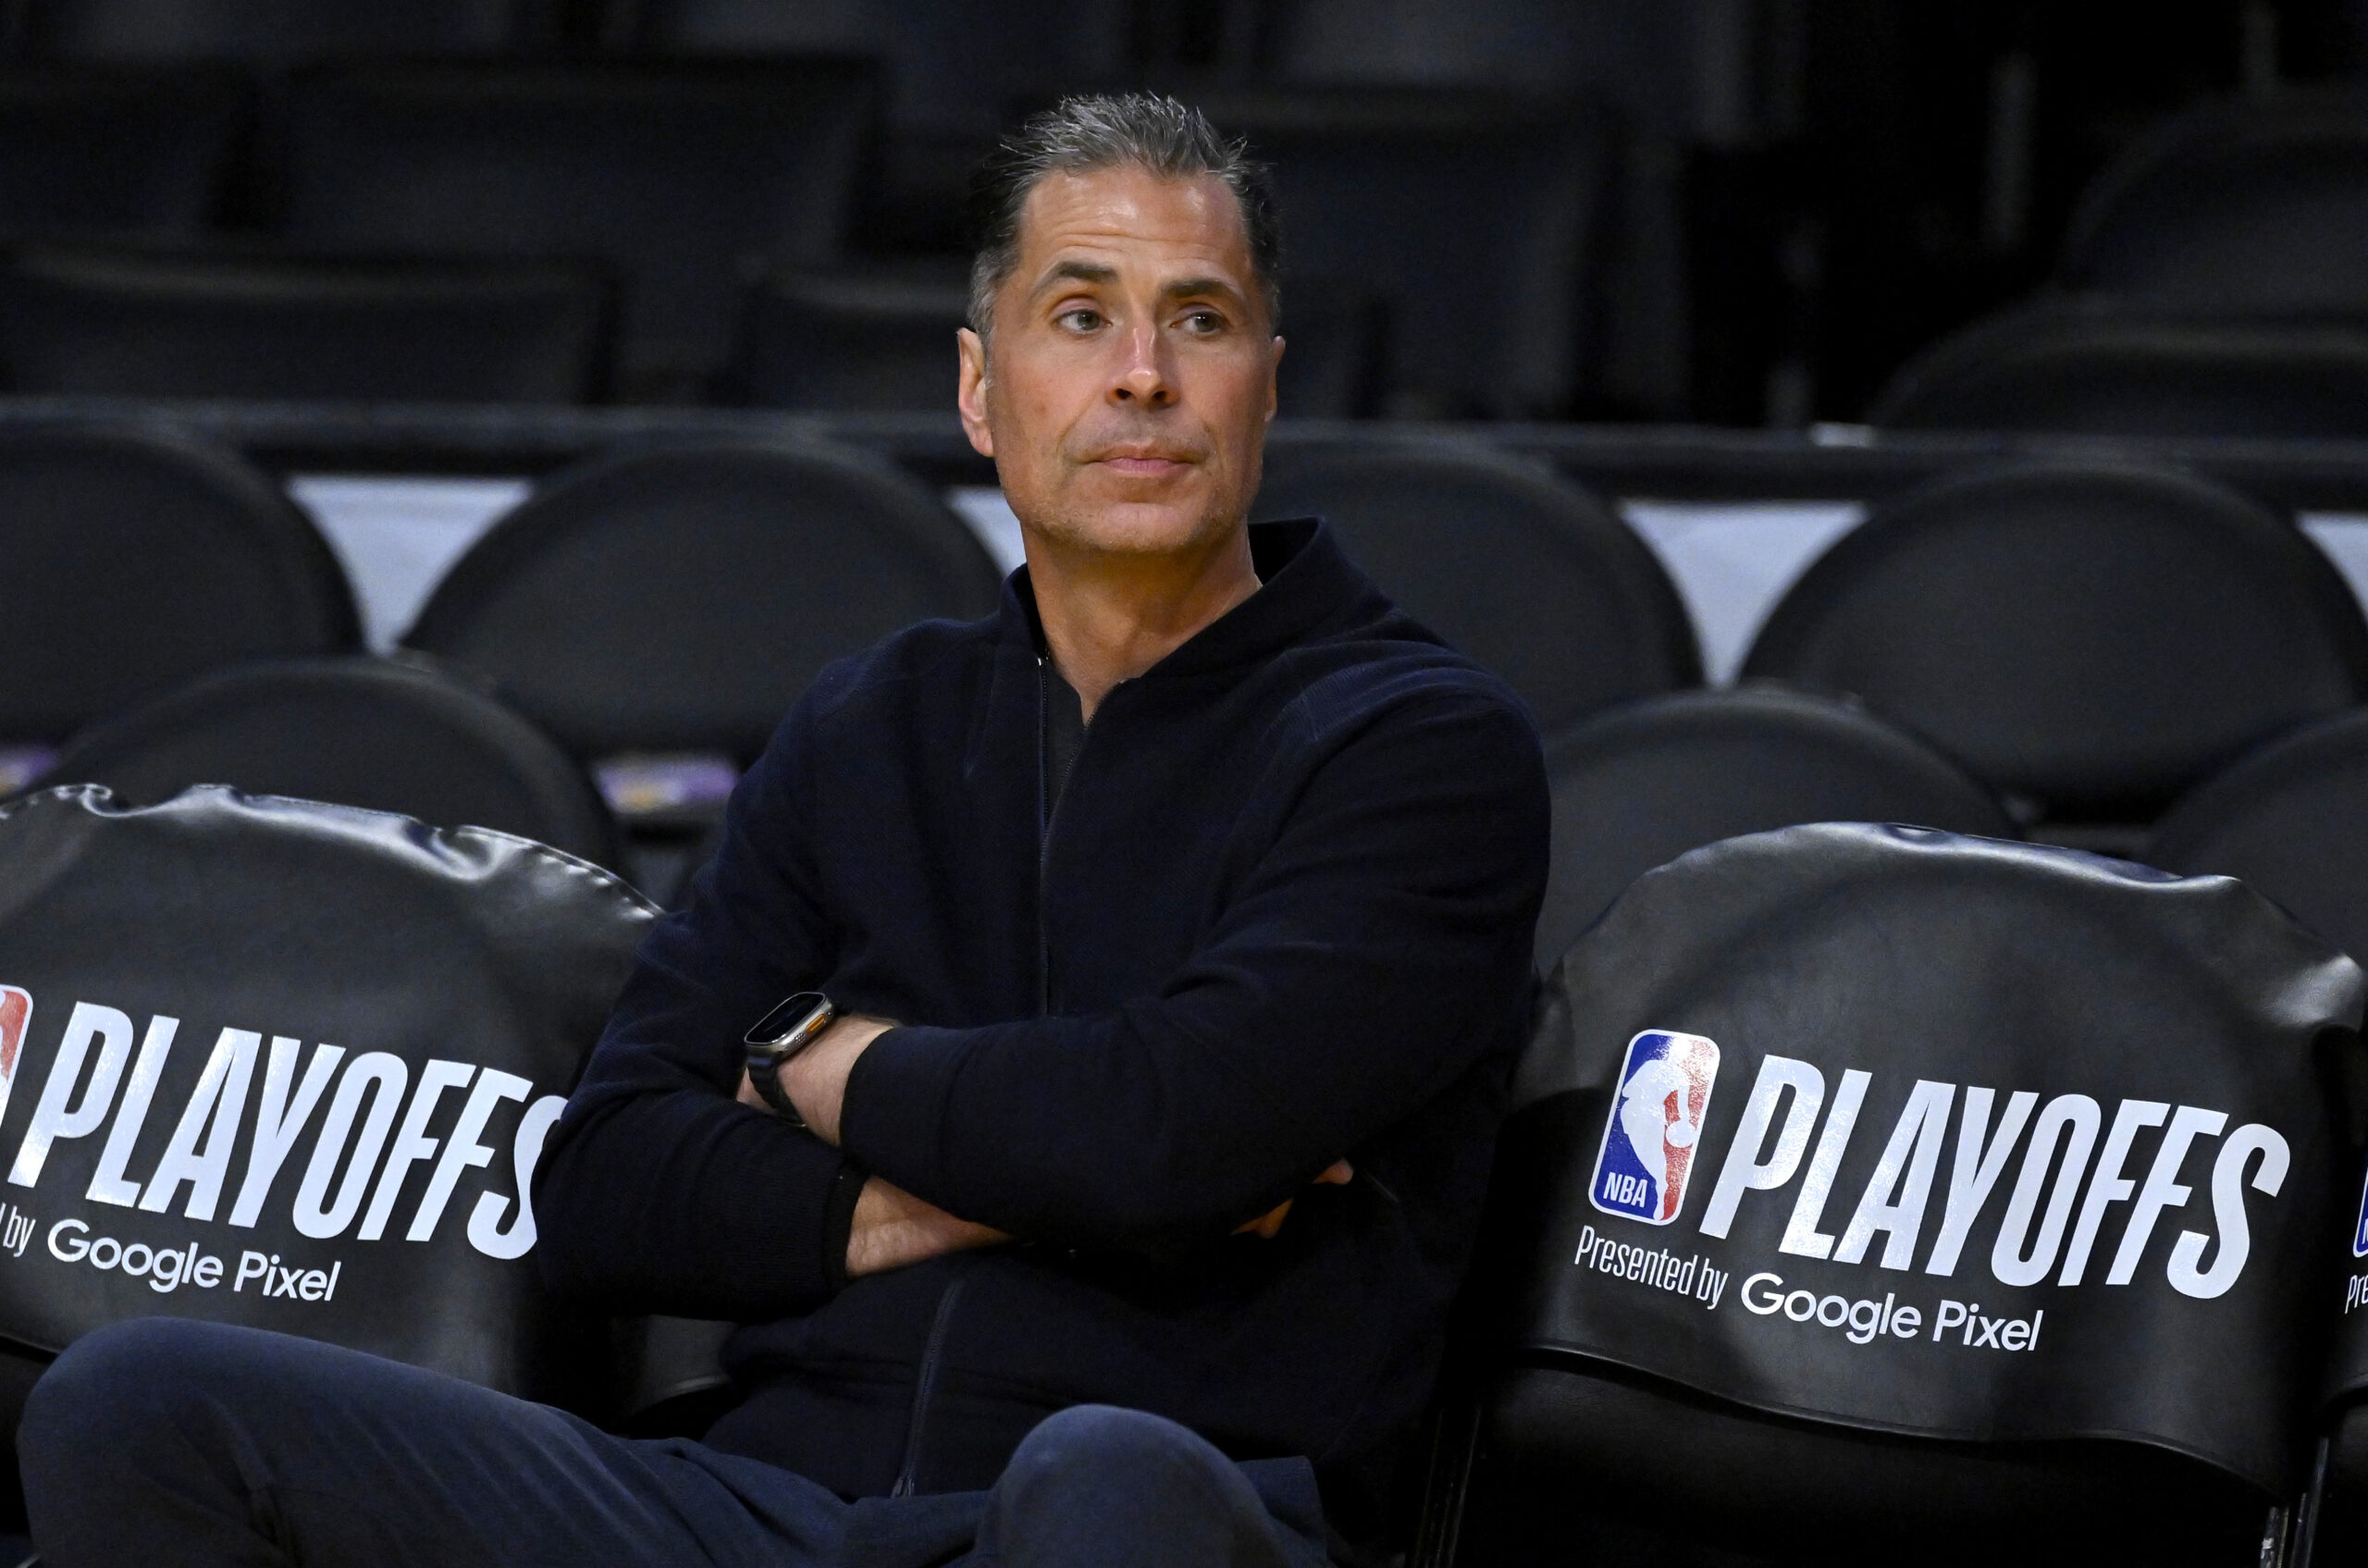 Apr 28, 2023; Los Angeles, California, USA; Los Angeles Lakers vice president of basketball operations and general manager Rob Pelinka looks on prior to game six of the 2023 NBA playoffs against the Memphis Grizzlies at Crypto.com Arena. Mandatory Credit: Jayne Kamin-Oncea-USA TODAY Sports